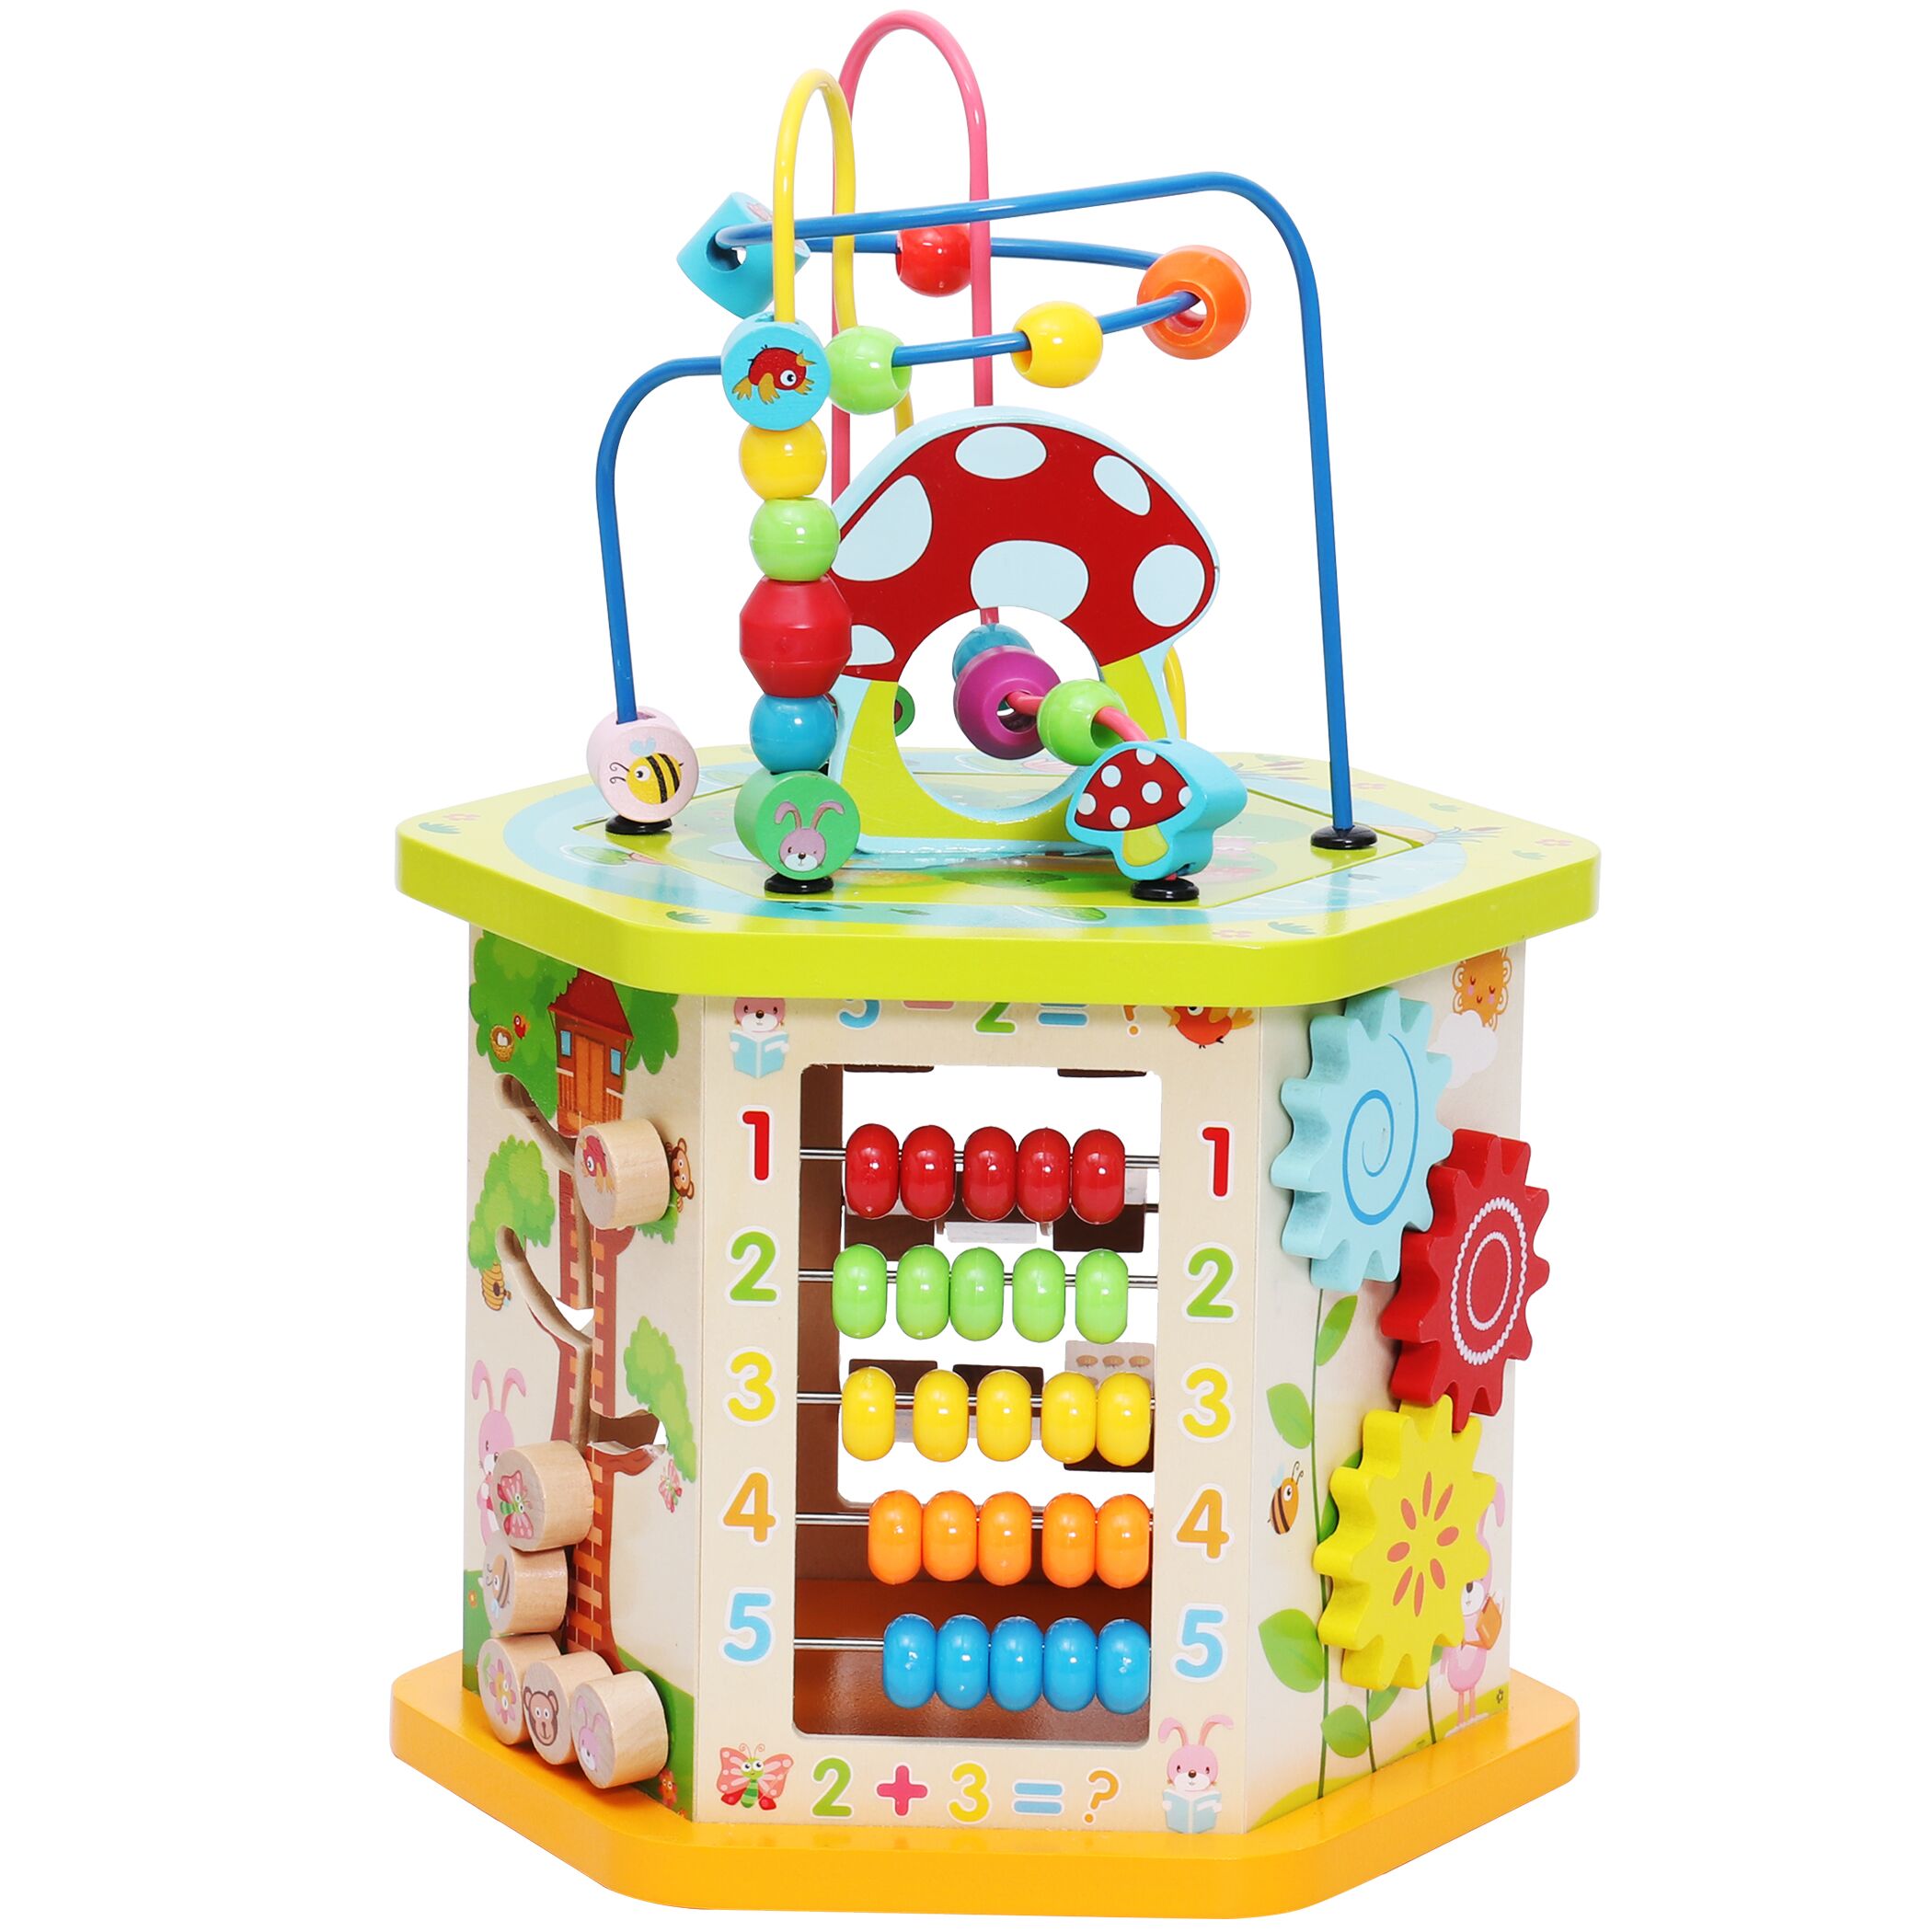 Lavievert 9-in-1 Play Cube Activity Center Multifunctional Bead Maze Toddler Educational Toys Game … - image 1 of 6